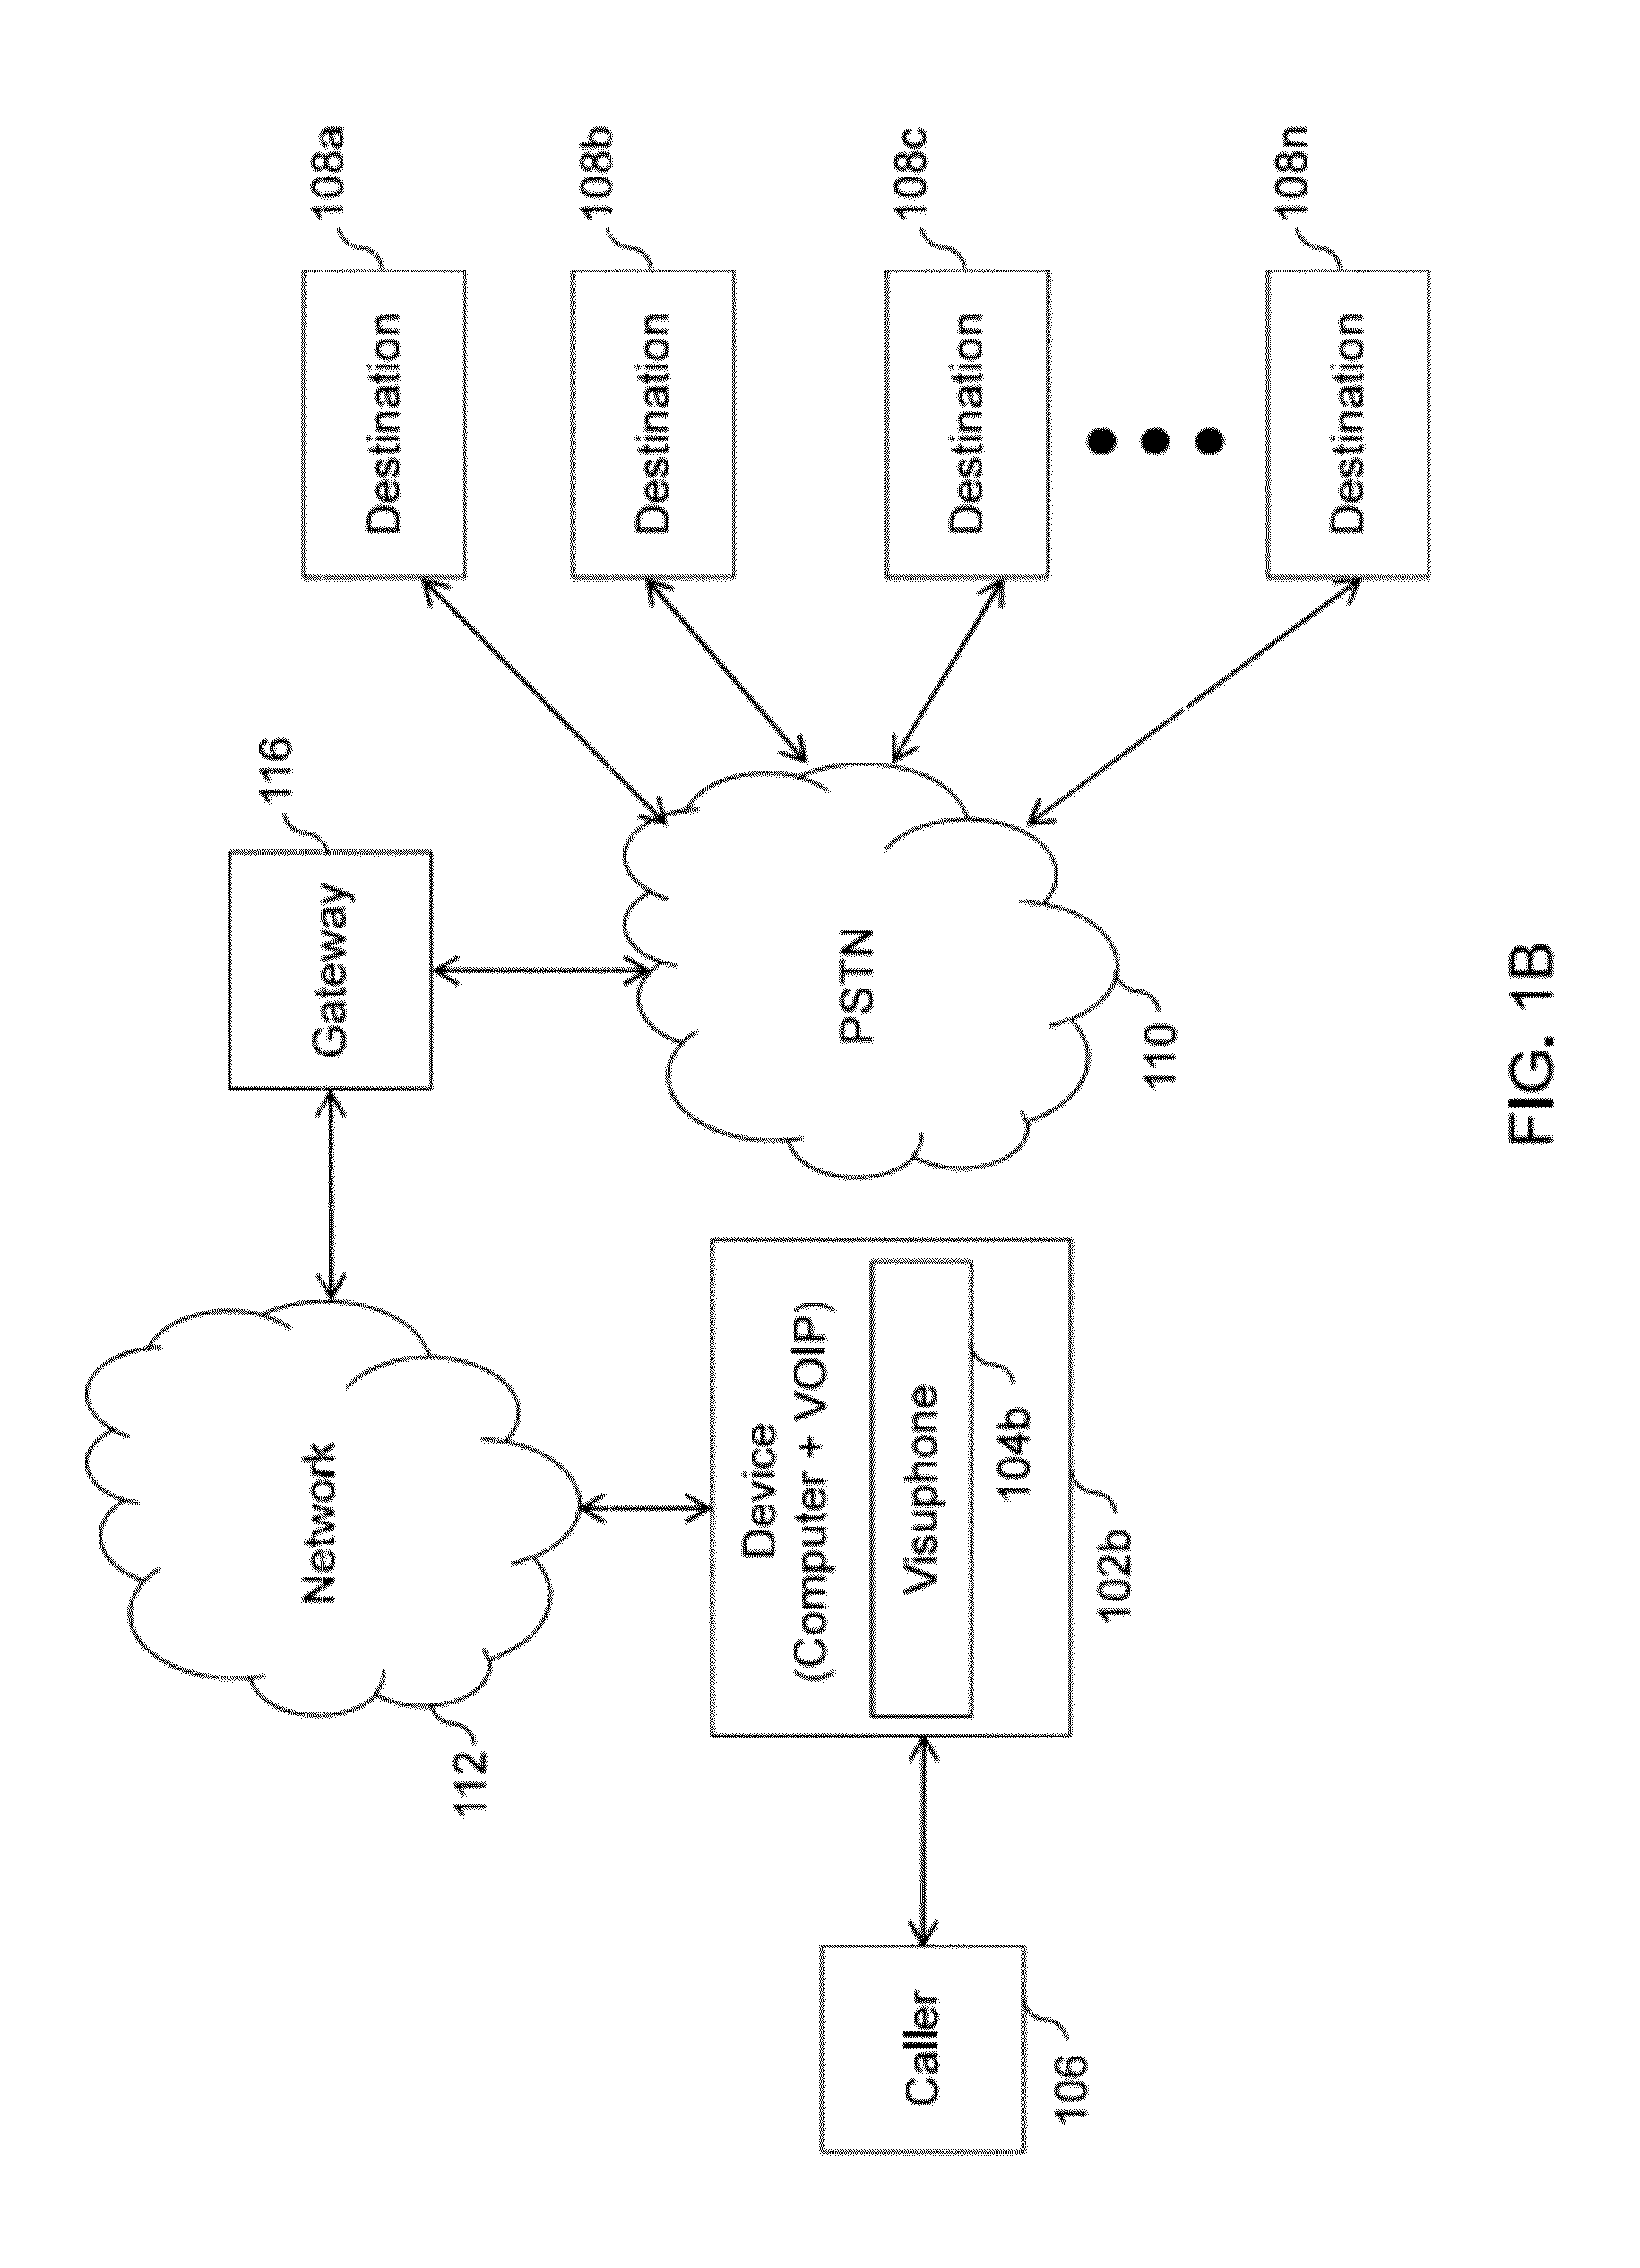 Systems and methods for visual presentation and selection of IVR menu